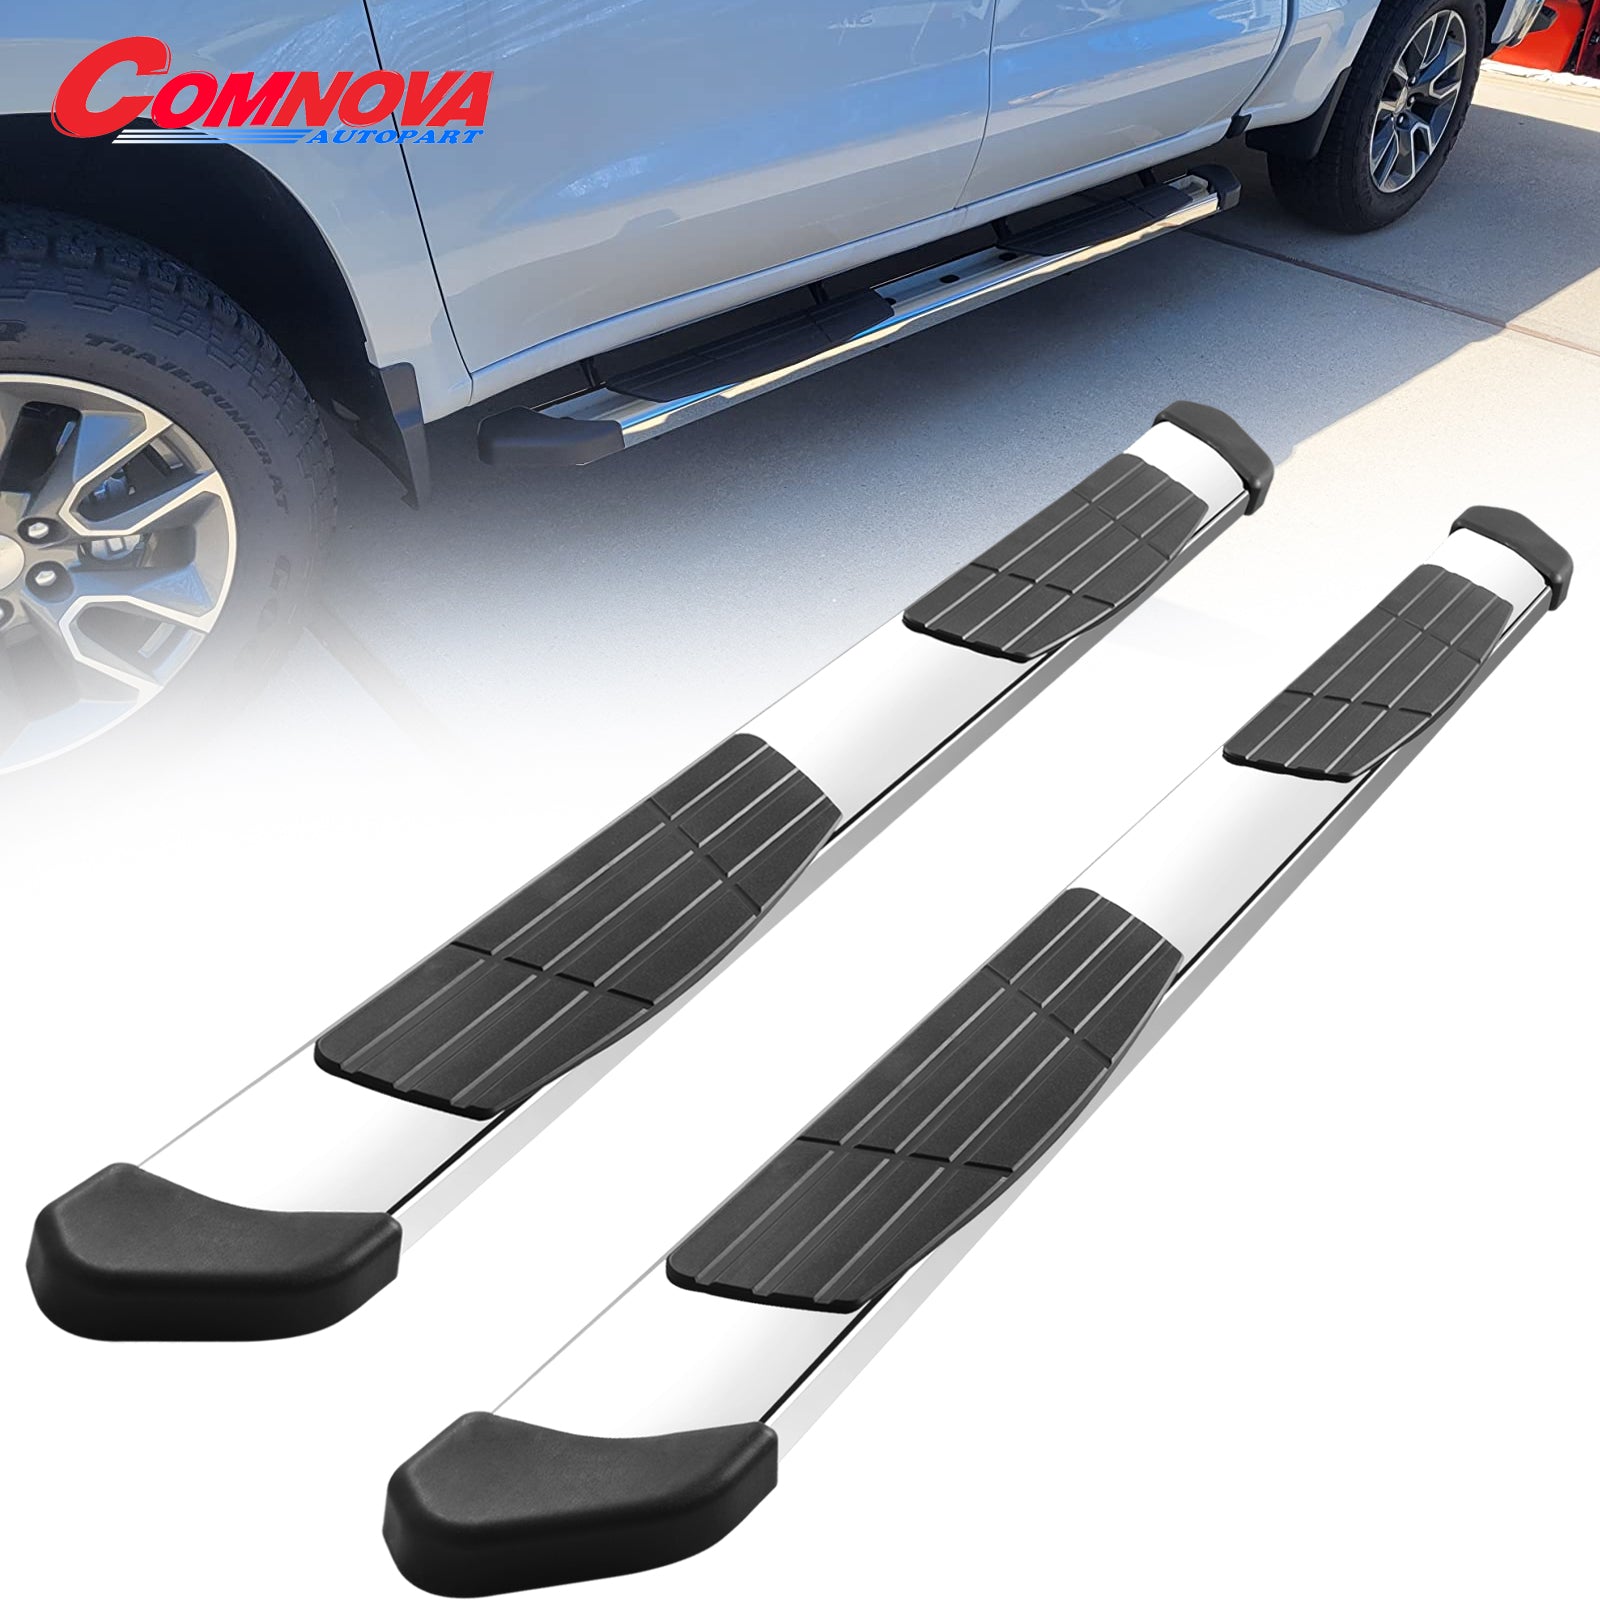 6.5” Running Boards Compatible with 2009-2018 Dodge Ram 1500 & 2010-2024 Ram 2500 3500 Crew Cab, Stainless Steel Side Steps T6 Style.- COMNOVA AUTOPART